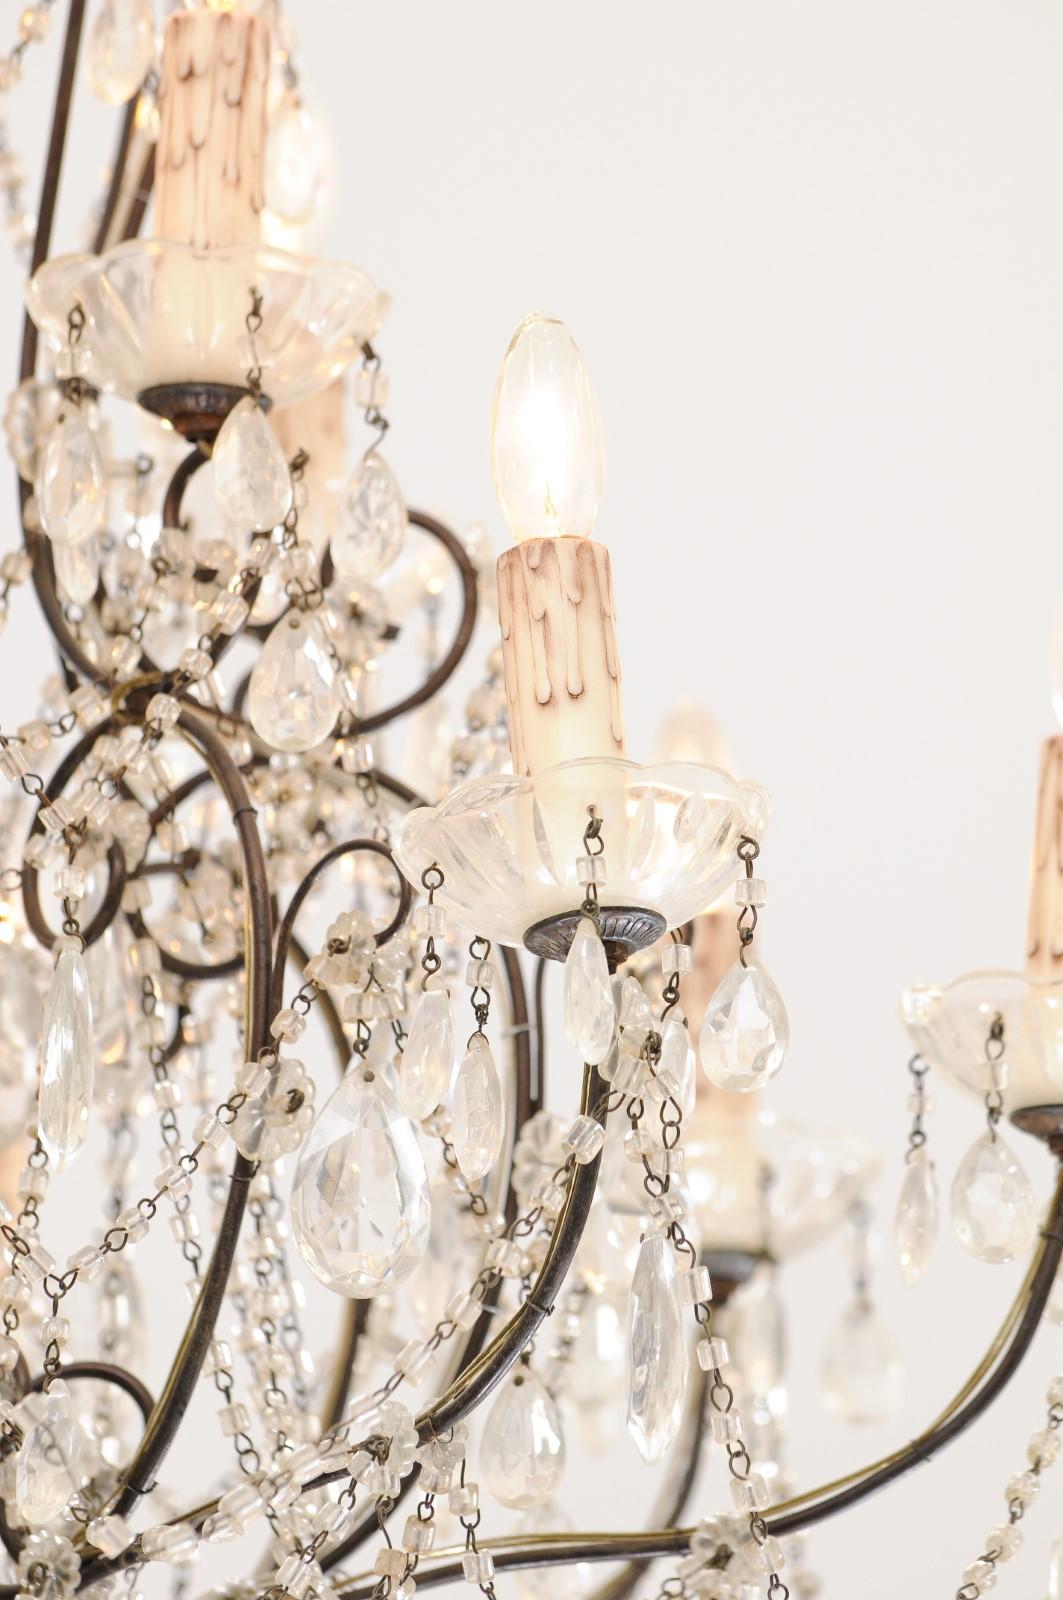 Italian 19th Century 10-Light Crystal and Iron Chandelier with Scrolling Arms For Sale 4